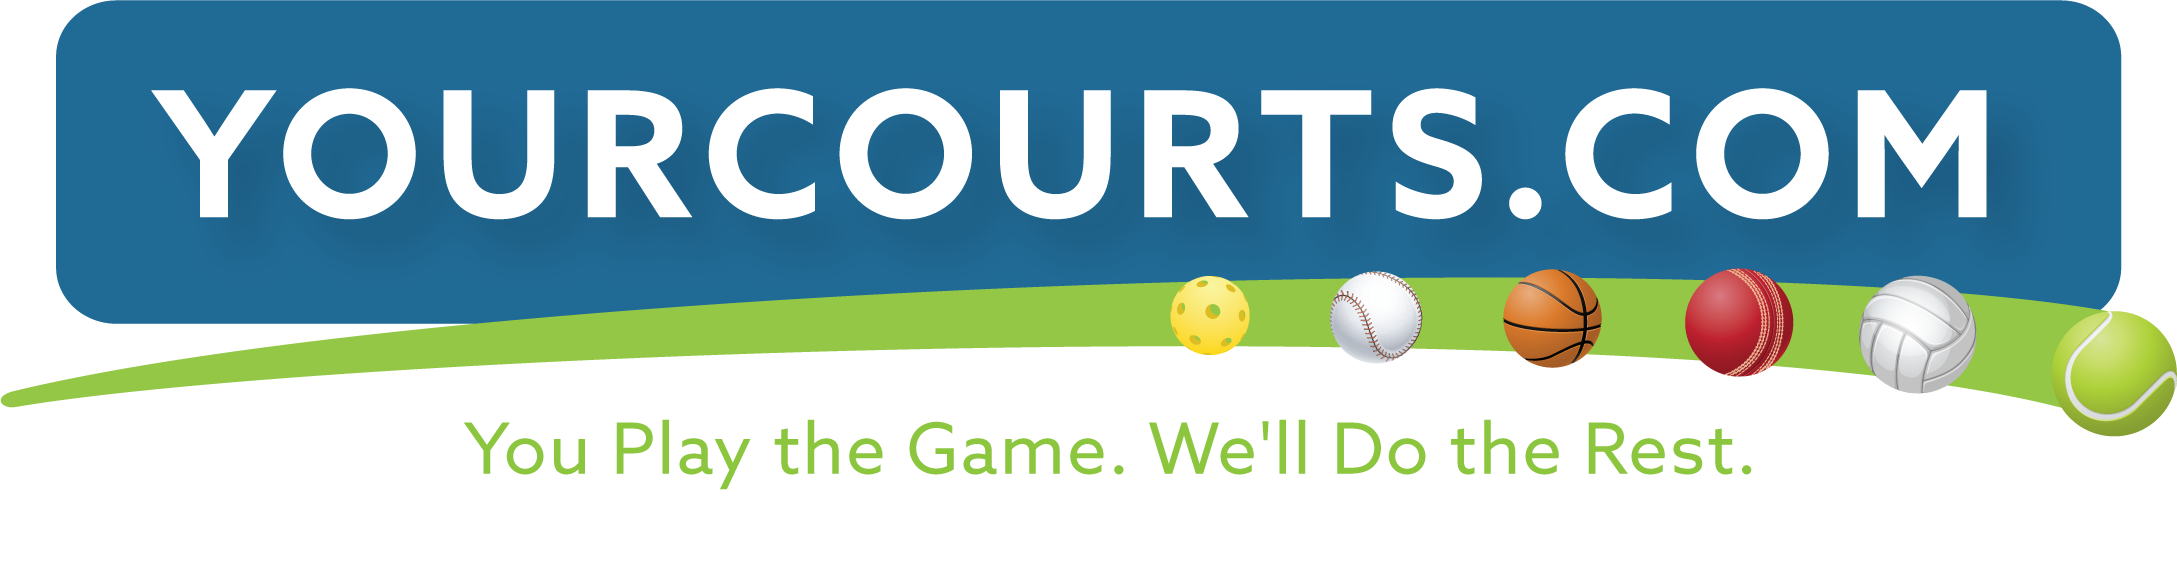 YourCourts